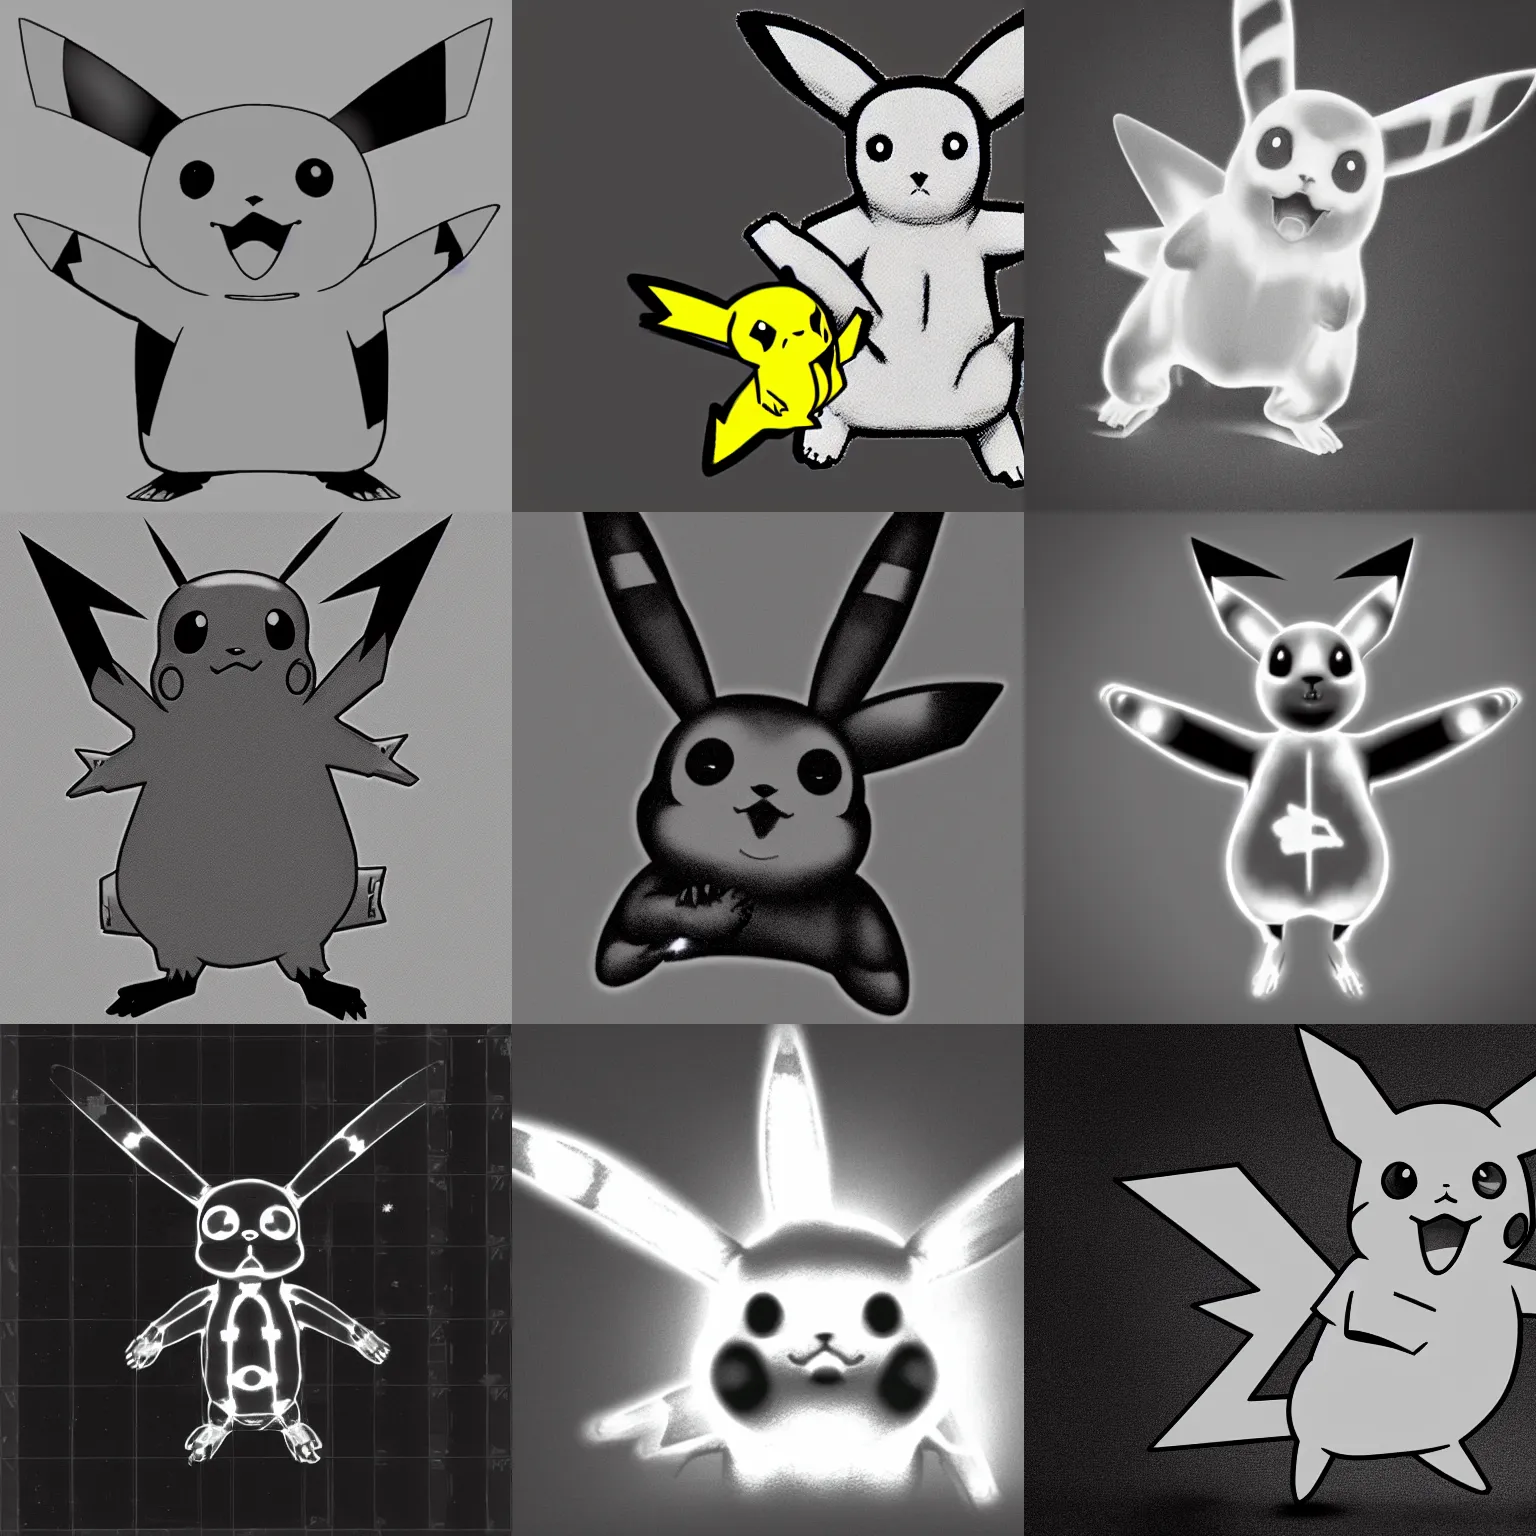 Prompt: X-ray image of a pikachu